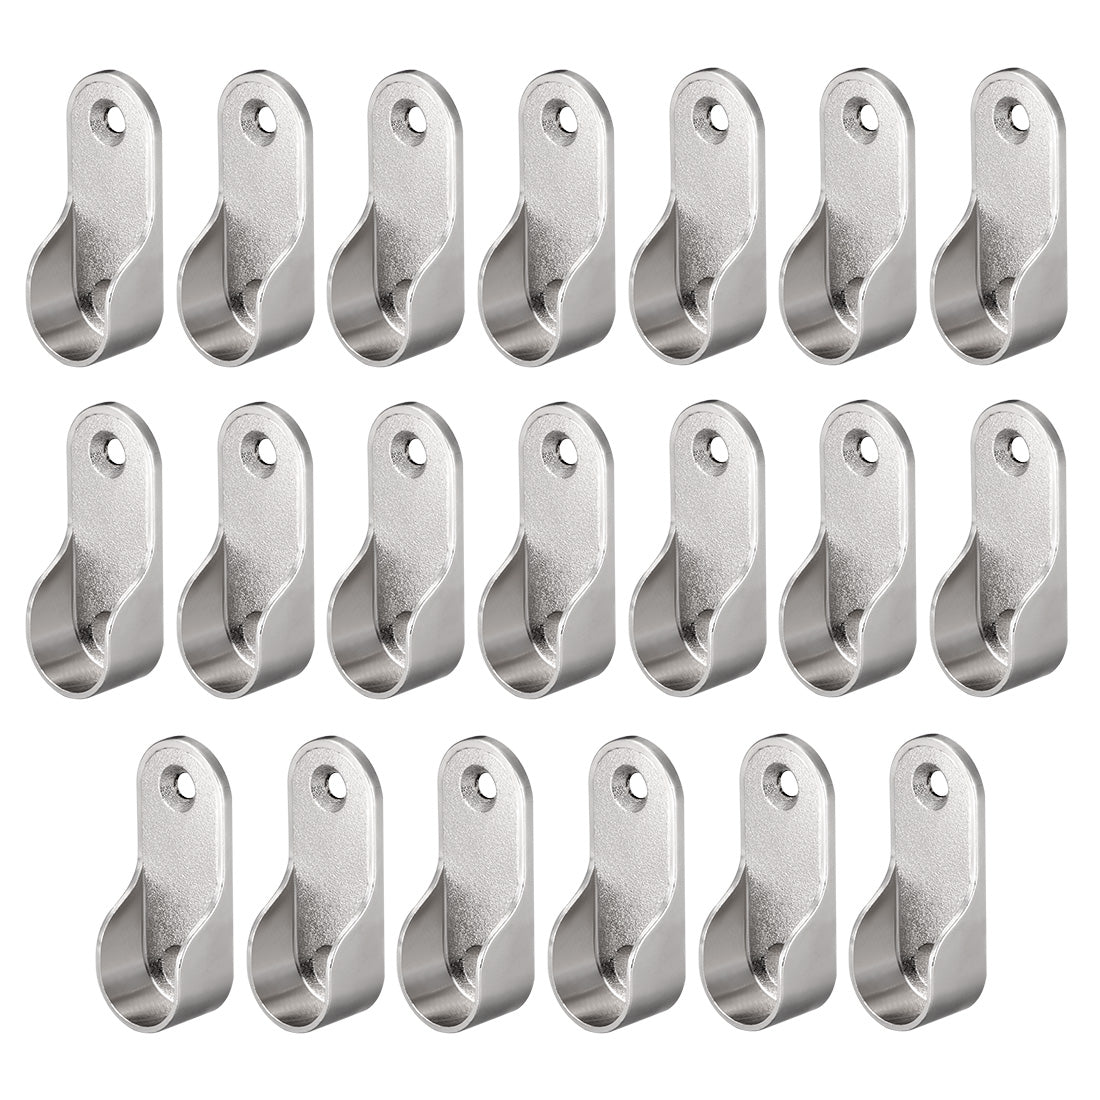 uxcell Uxcell Zinc Alloy Oval Closet Rod End Supports, Wardrobe Rod Flange Bracket Support Fit Rod Dia 16mm 20pcs